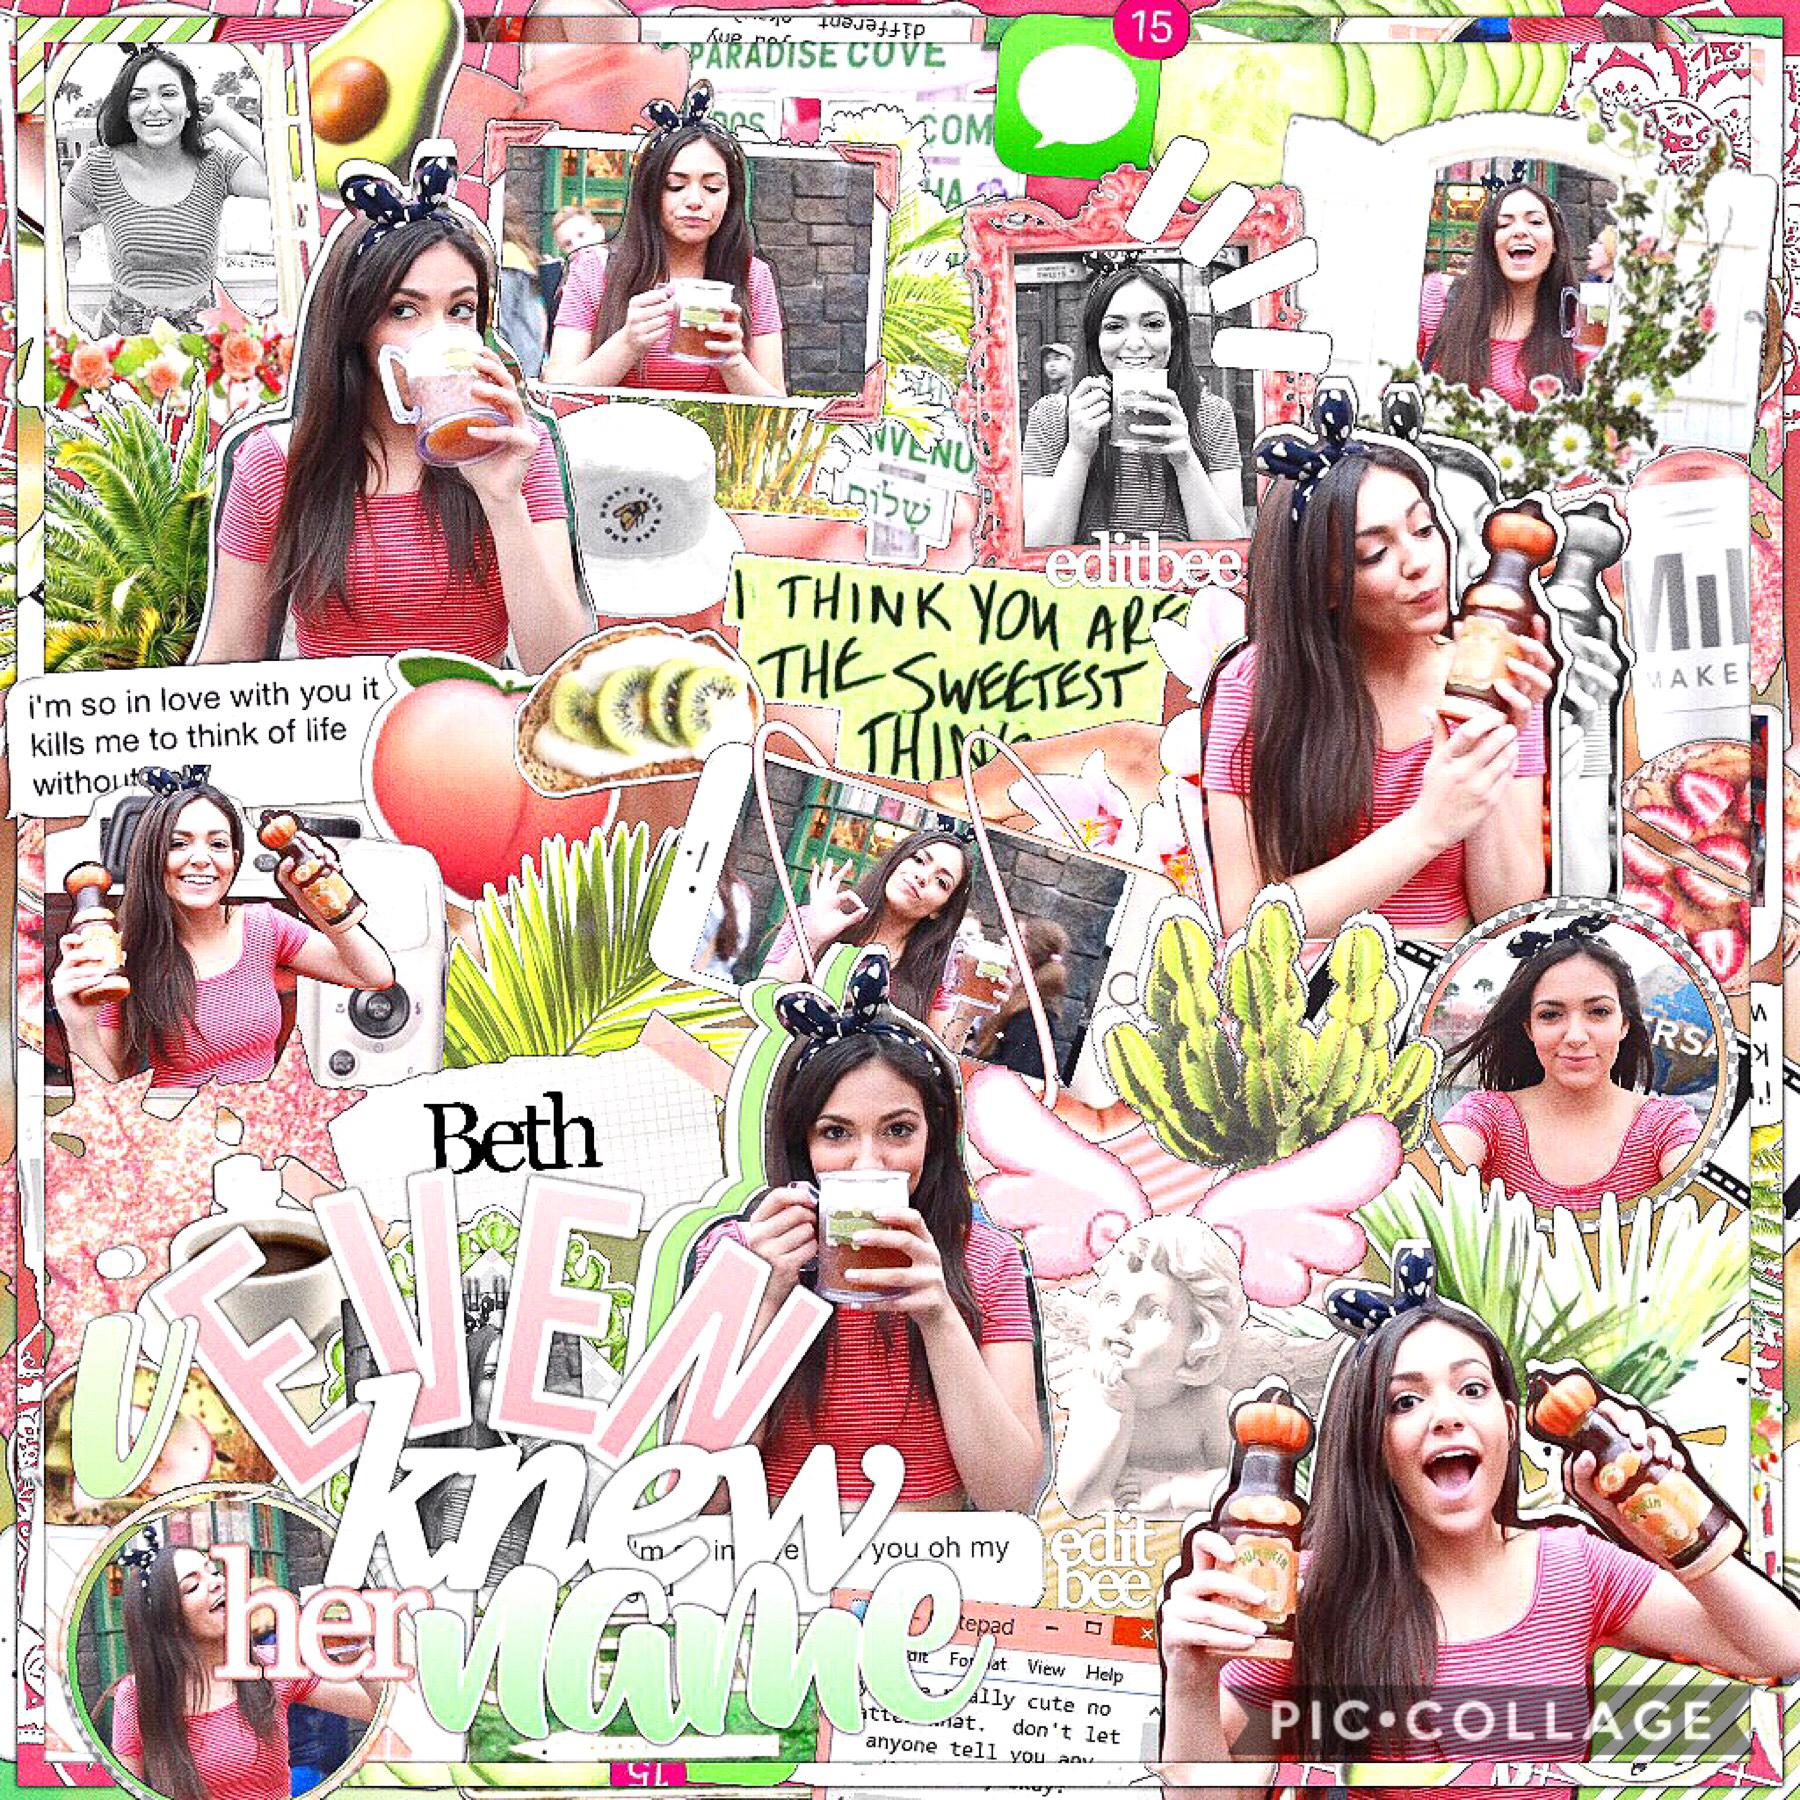 alohaa 🌺 I'm kind of lazy lately and I have school too, so I apologize for editing bad/not at all lol🌤 wanting fall lately haha GET PUMPED FOR THAT😍🍃 whi: @editbee